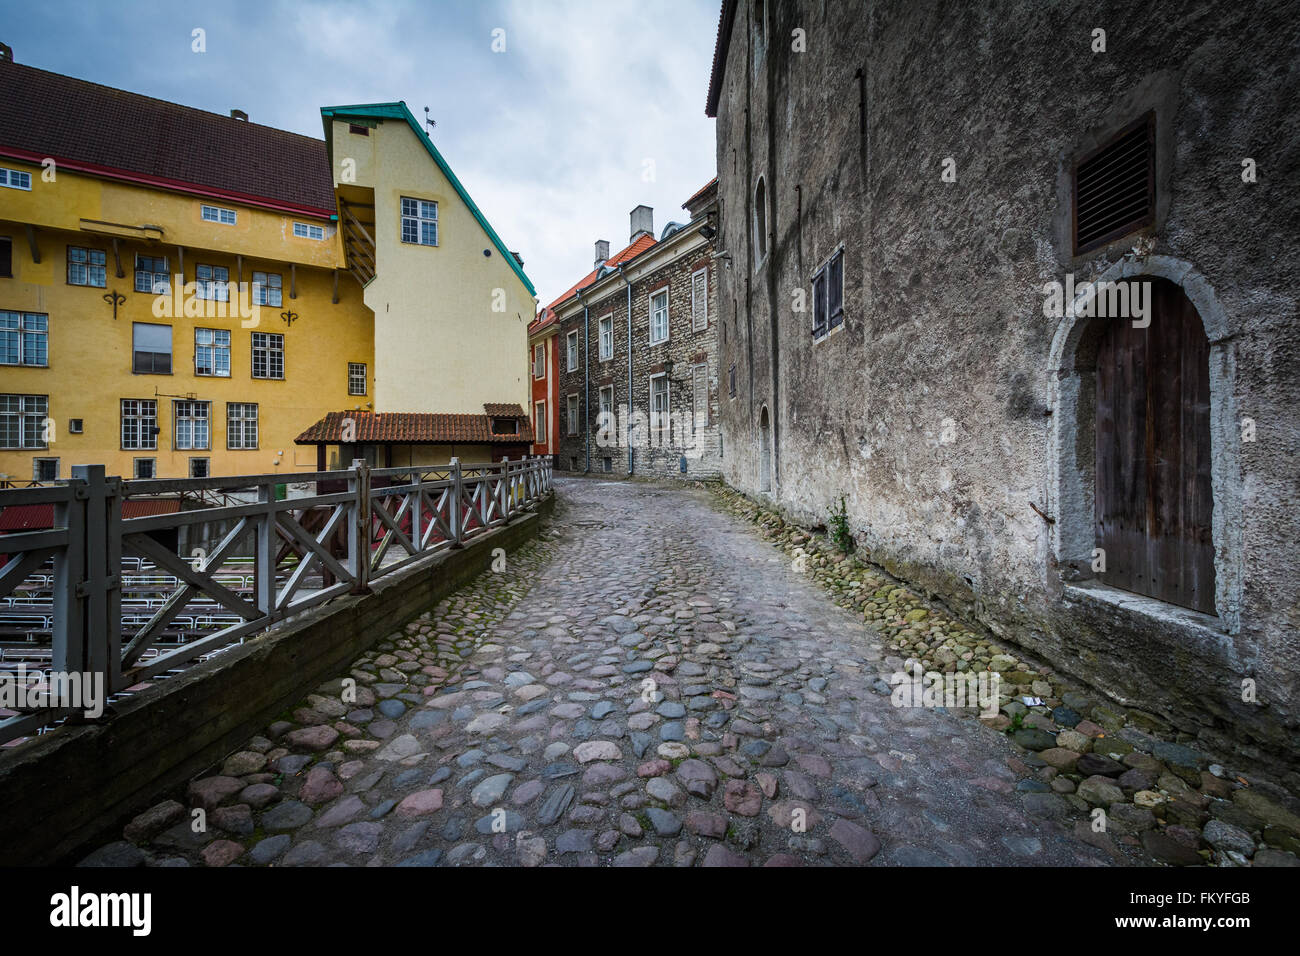 Cobblestone street and medieval architecture at night, in the Old Town of Tallinn, Estonia. Stock Photo